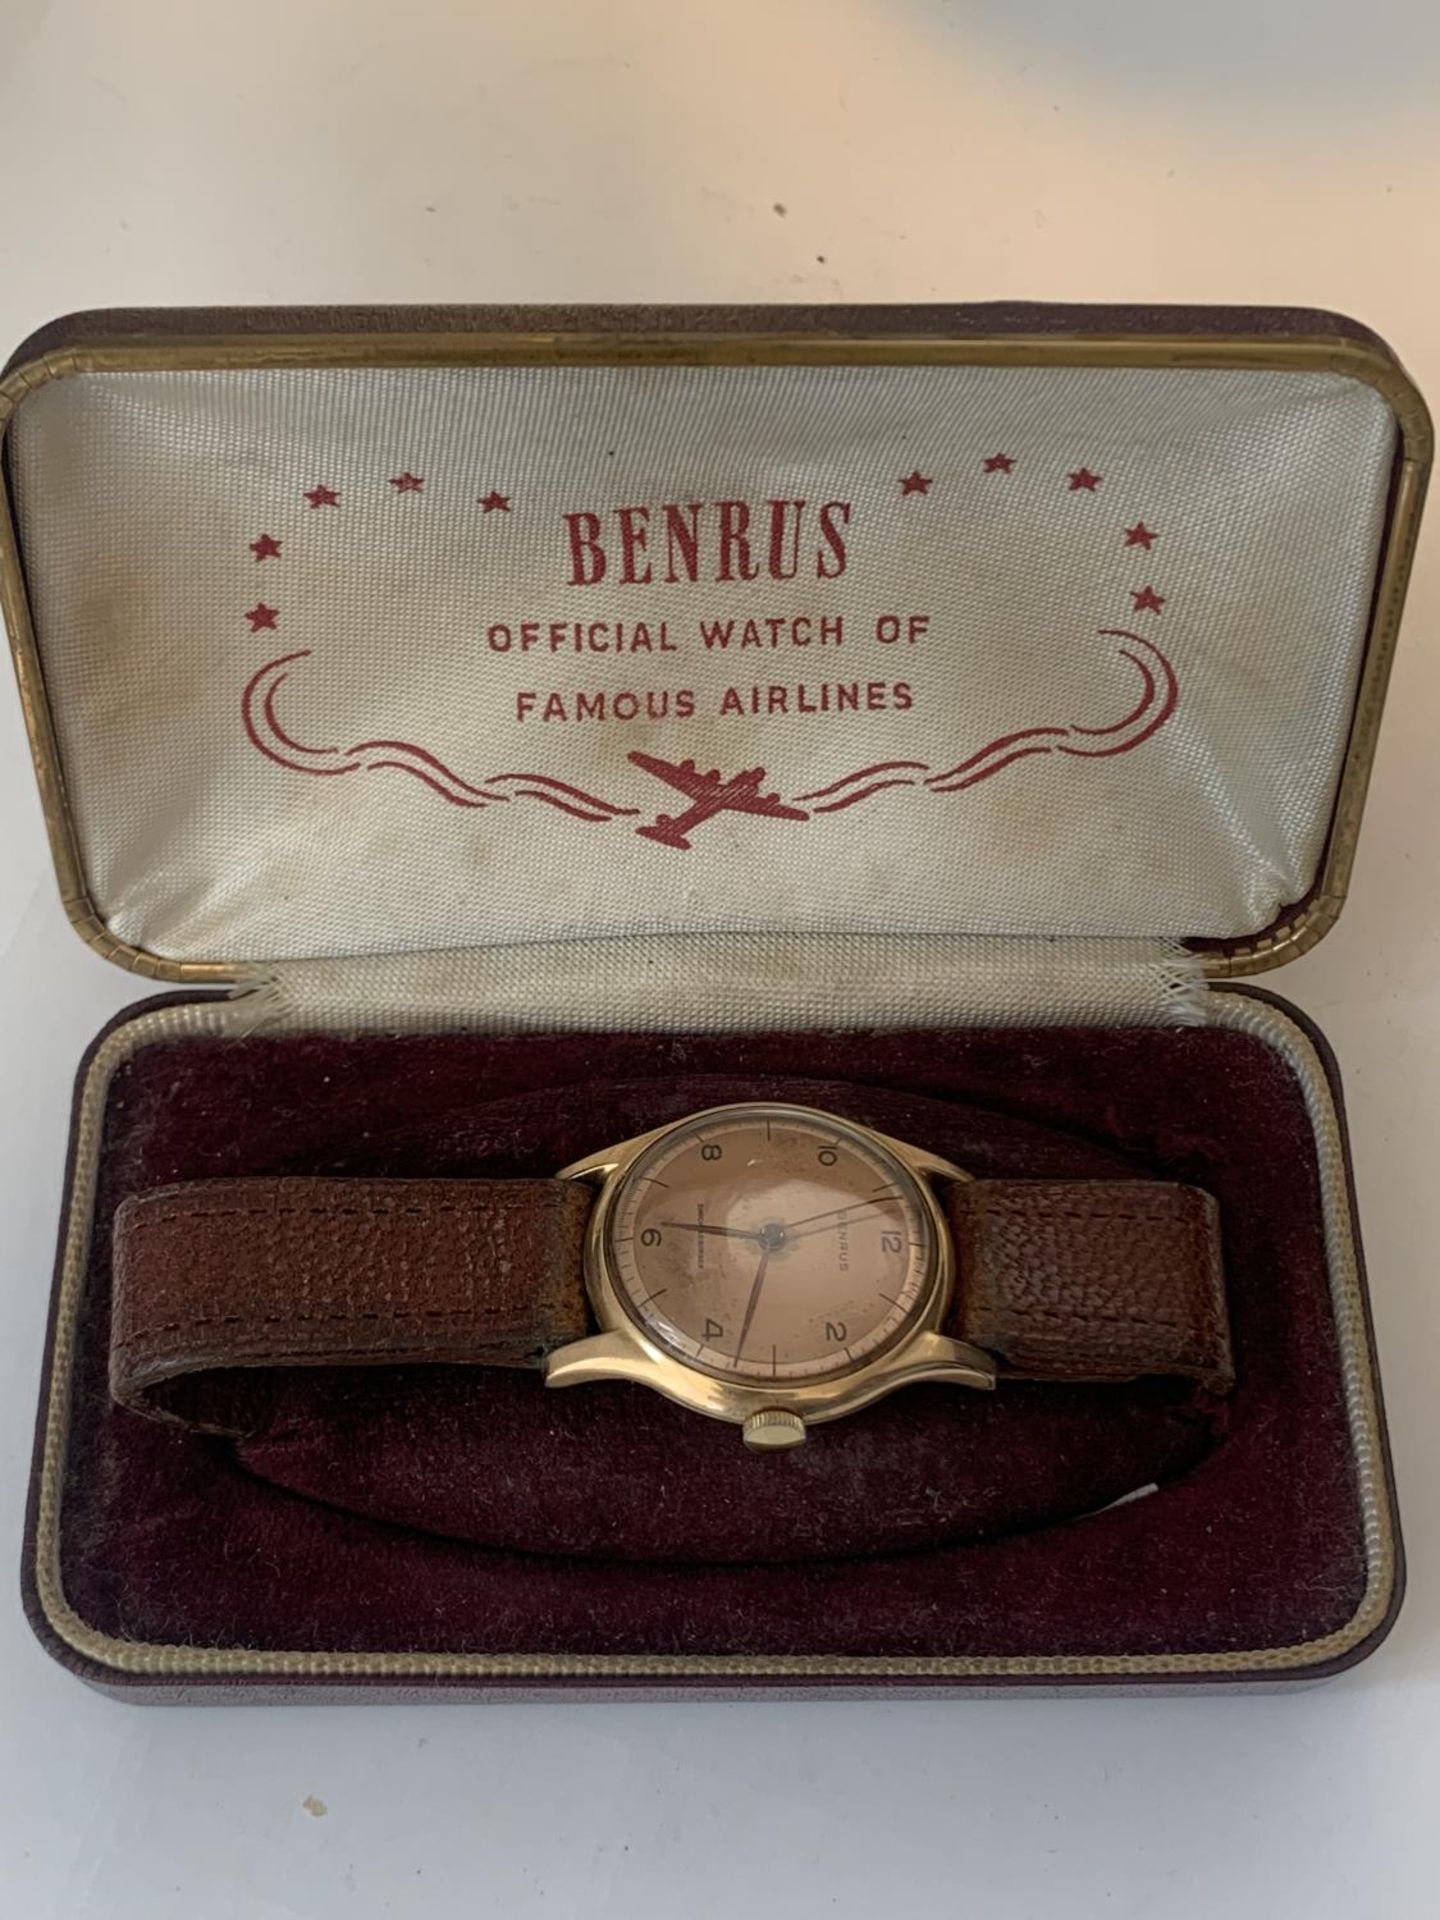 A VINTAGE BENRUS WRISTWATCH IN ORIGINAL BOX SAYING OFFICIAL WATCH OF THE FAMOUS AIRLINES